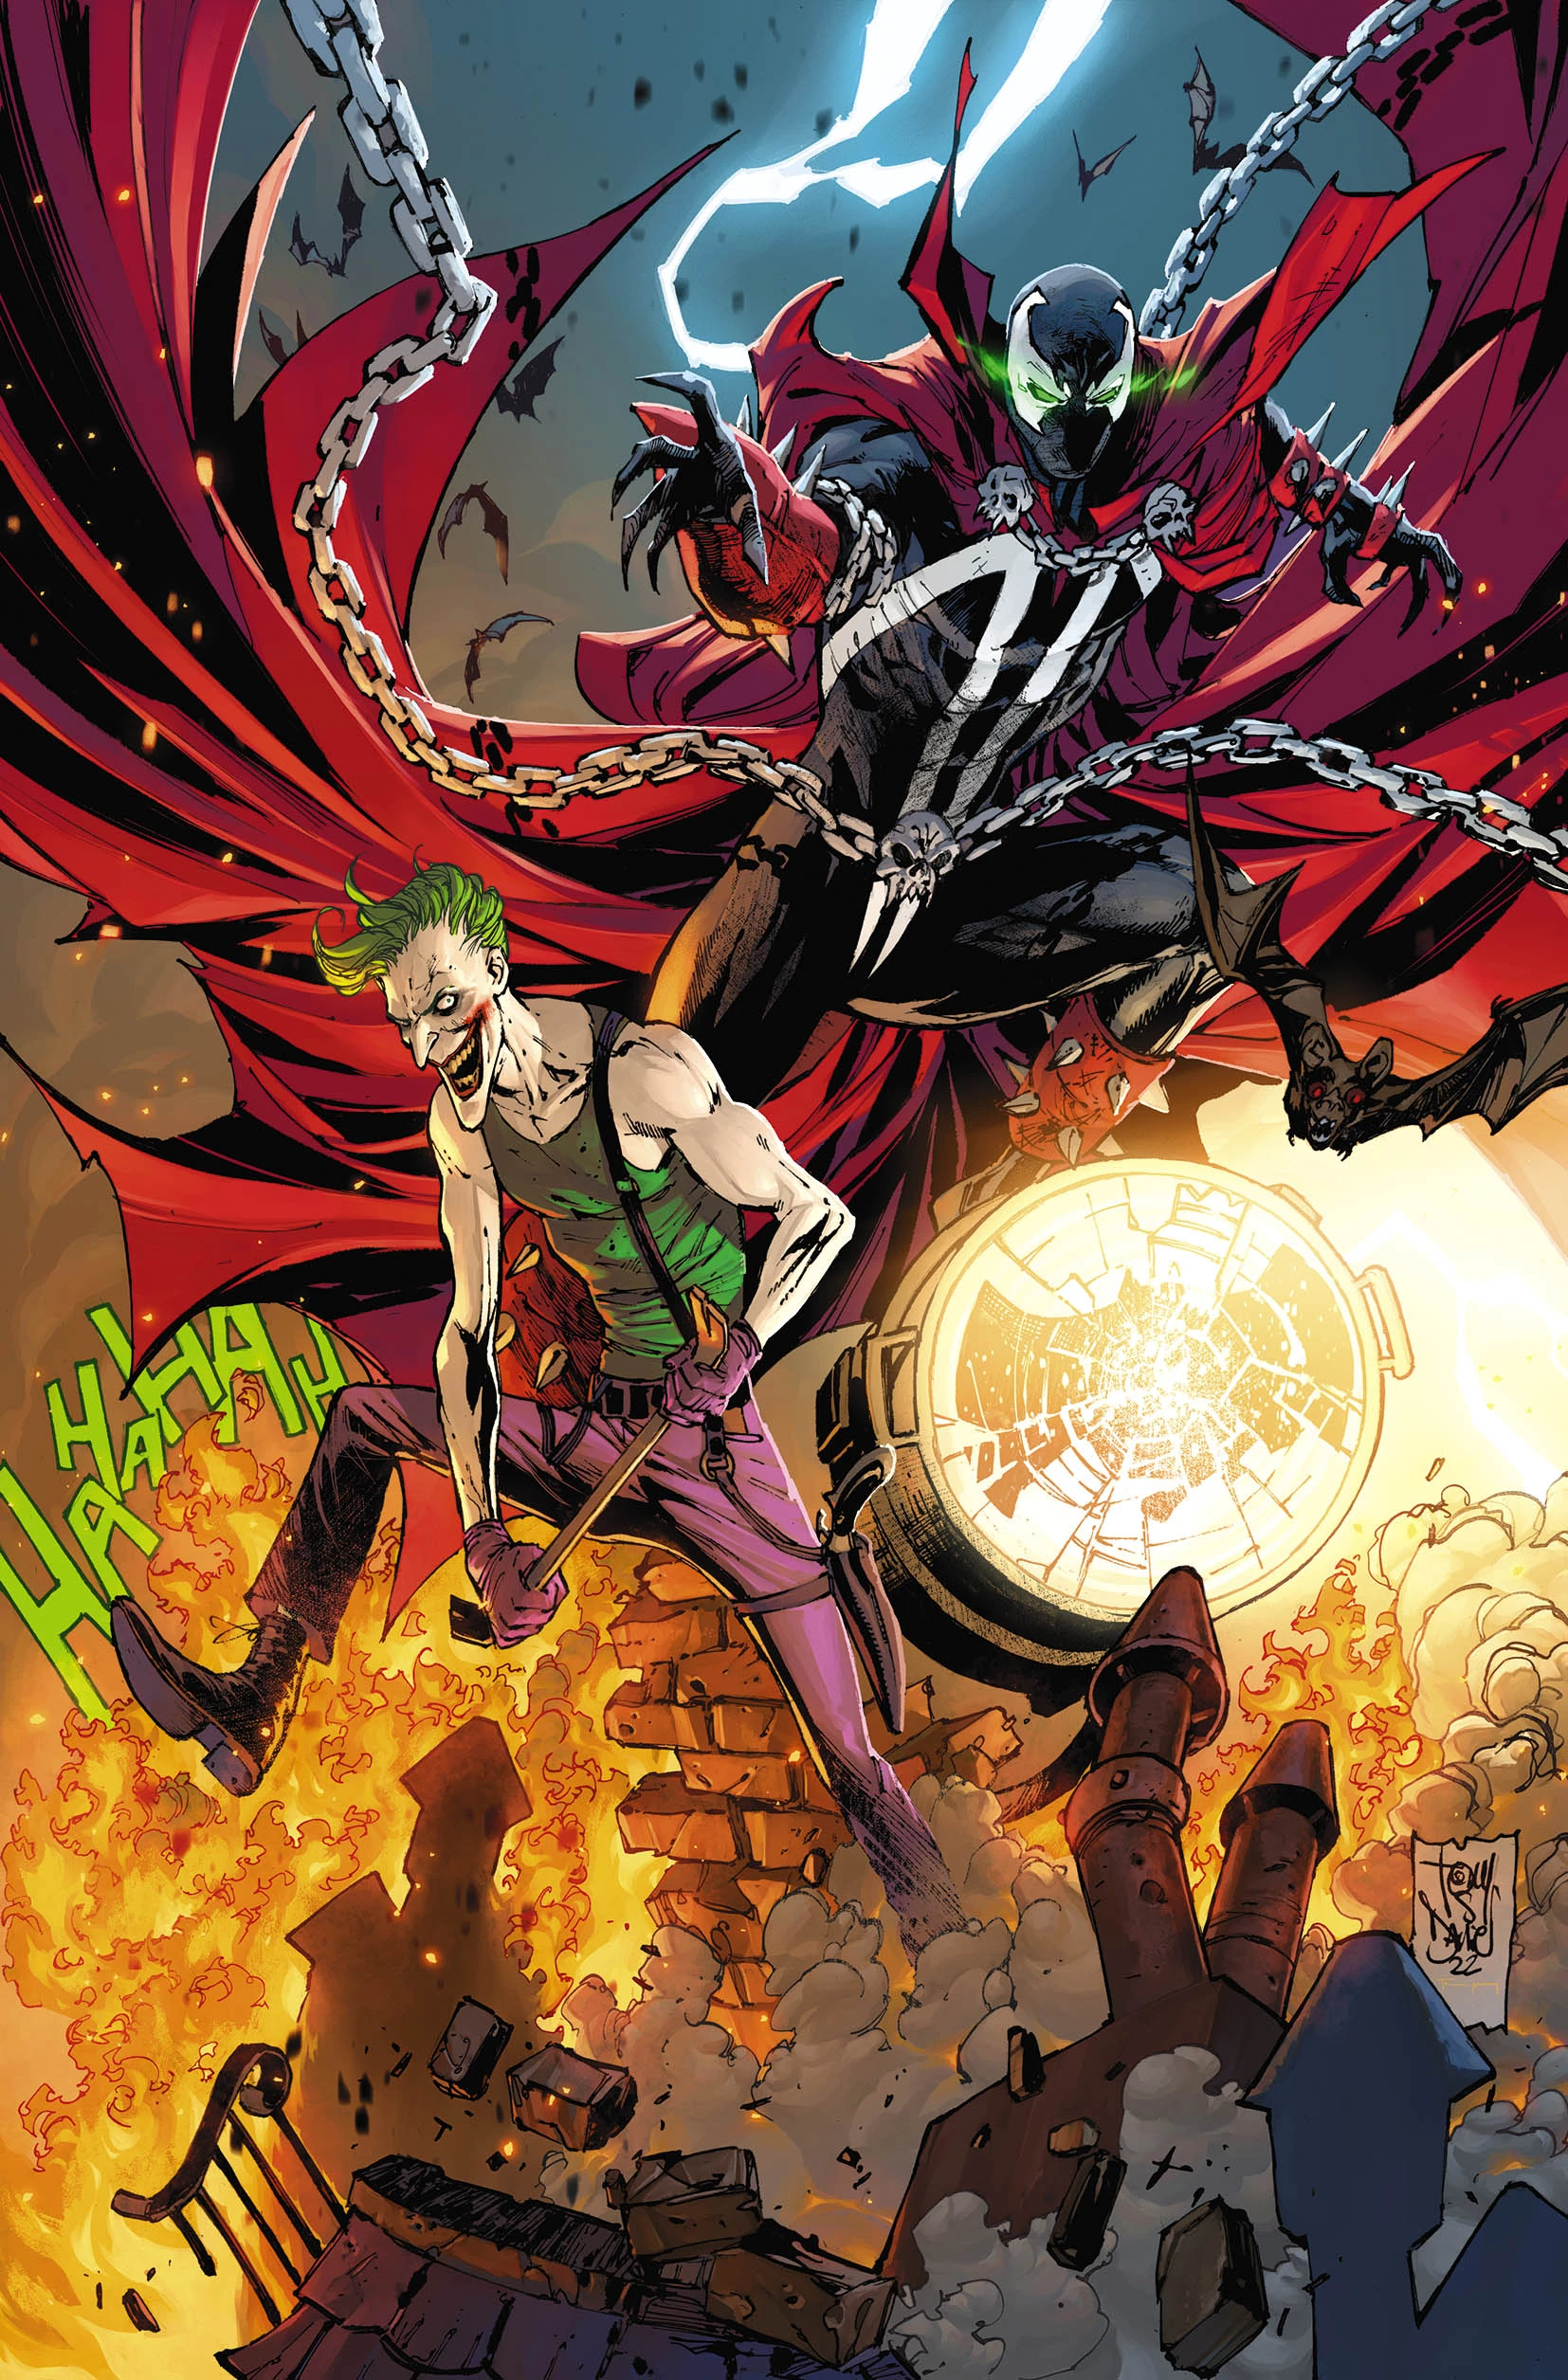 The Clown Prince of Crime teams up with the Angel of Armageddon on Tony S. Daniel and Tomeu Morey's Spawn variant cover to The Joker: The Man Who Laughs Vol. 1 #3 (2023), DC Comics